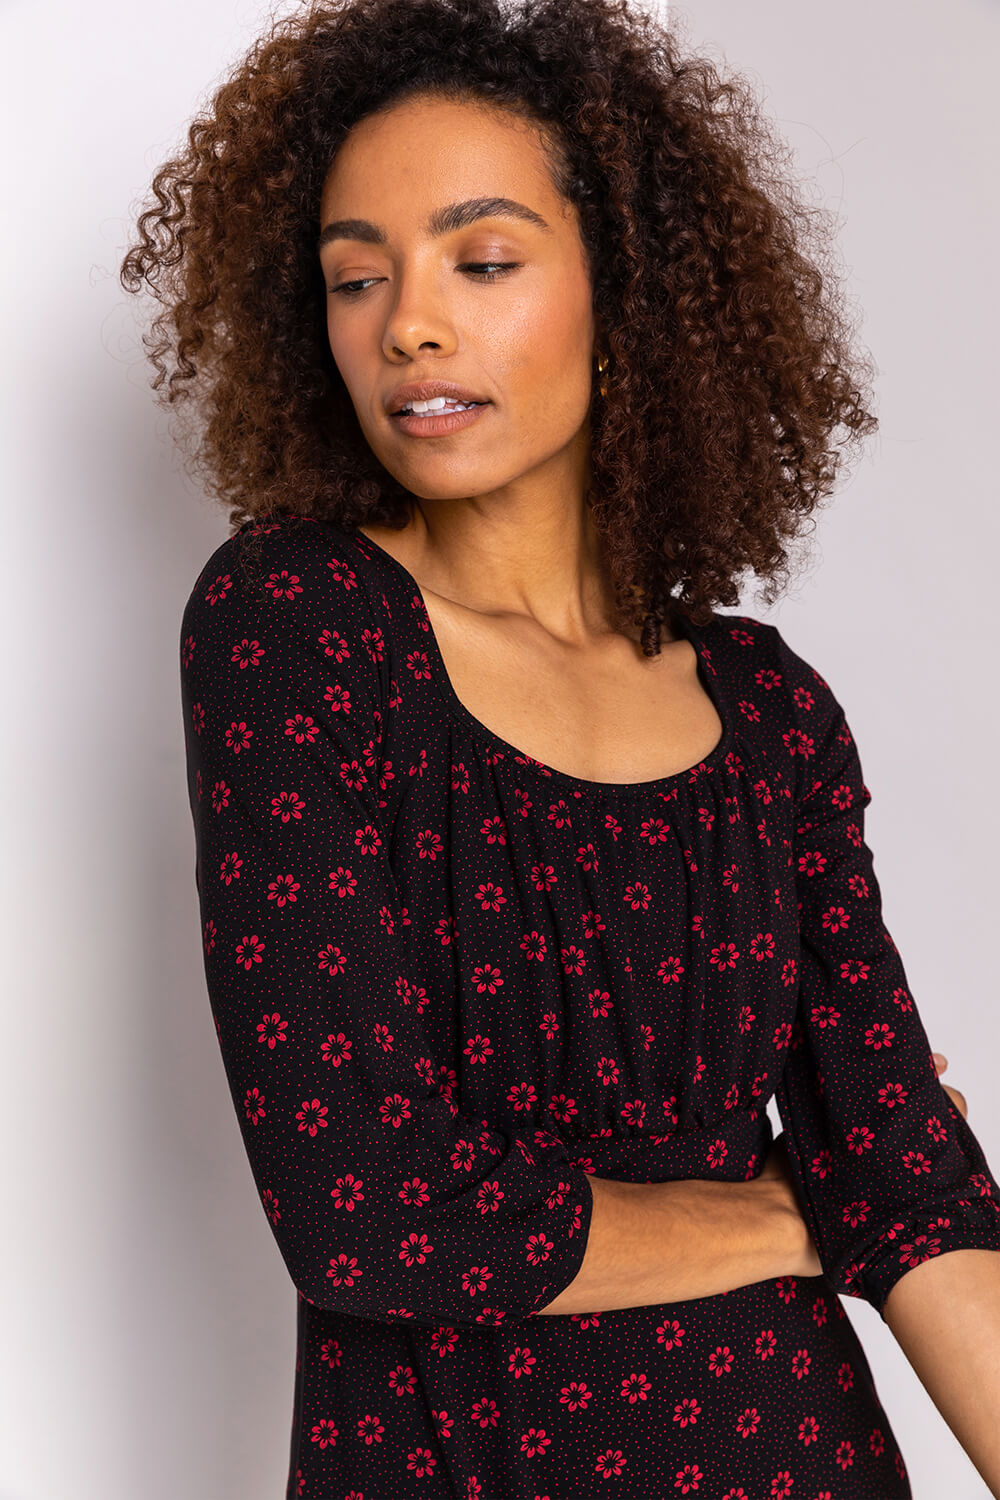 Port Floral Print 3/4 Sleeve Jersey Top, Image 4 of 4